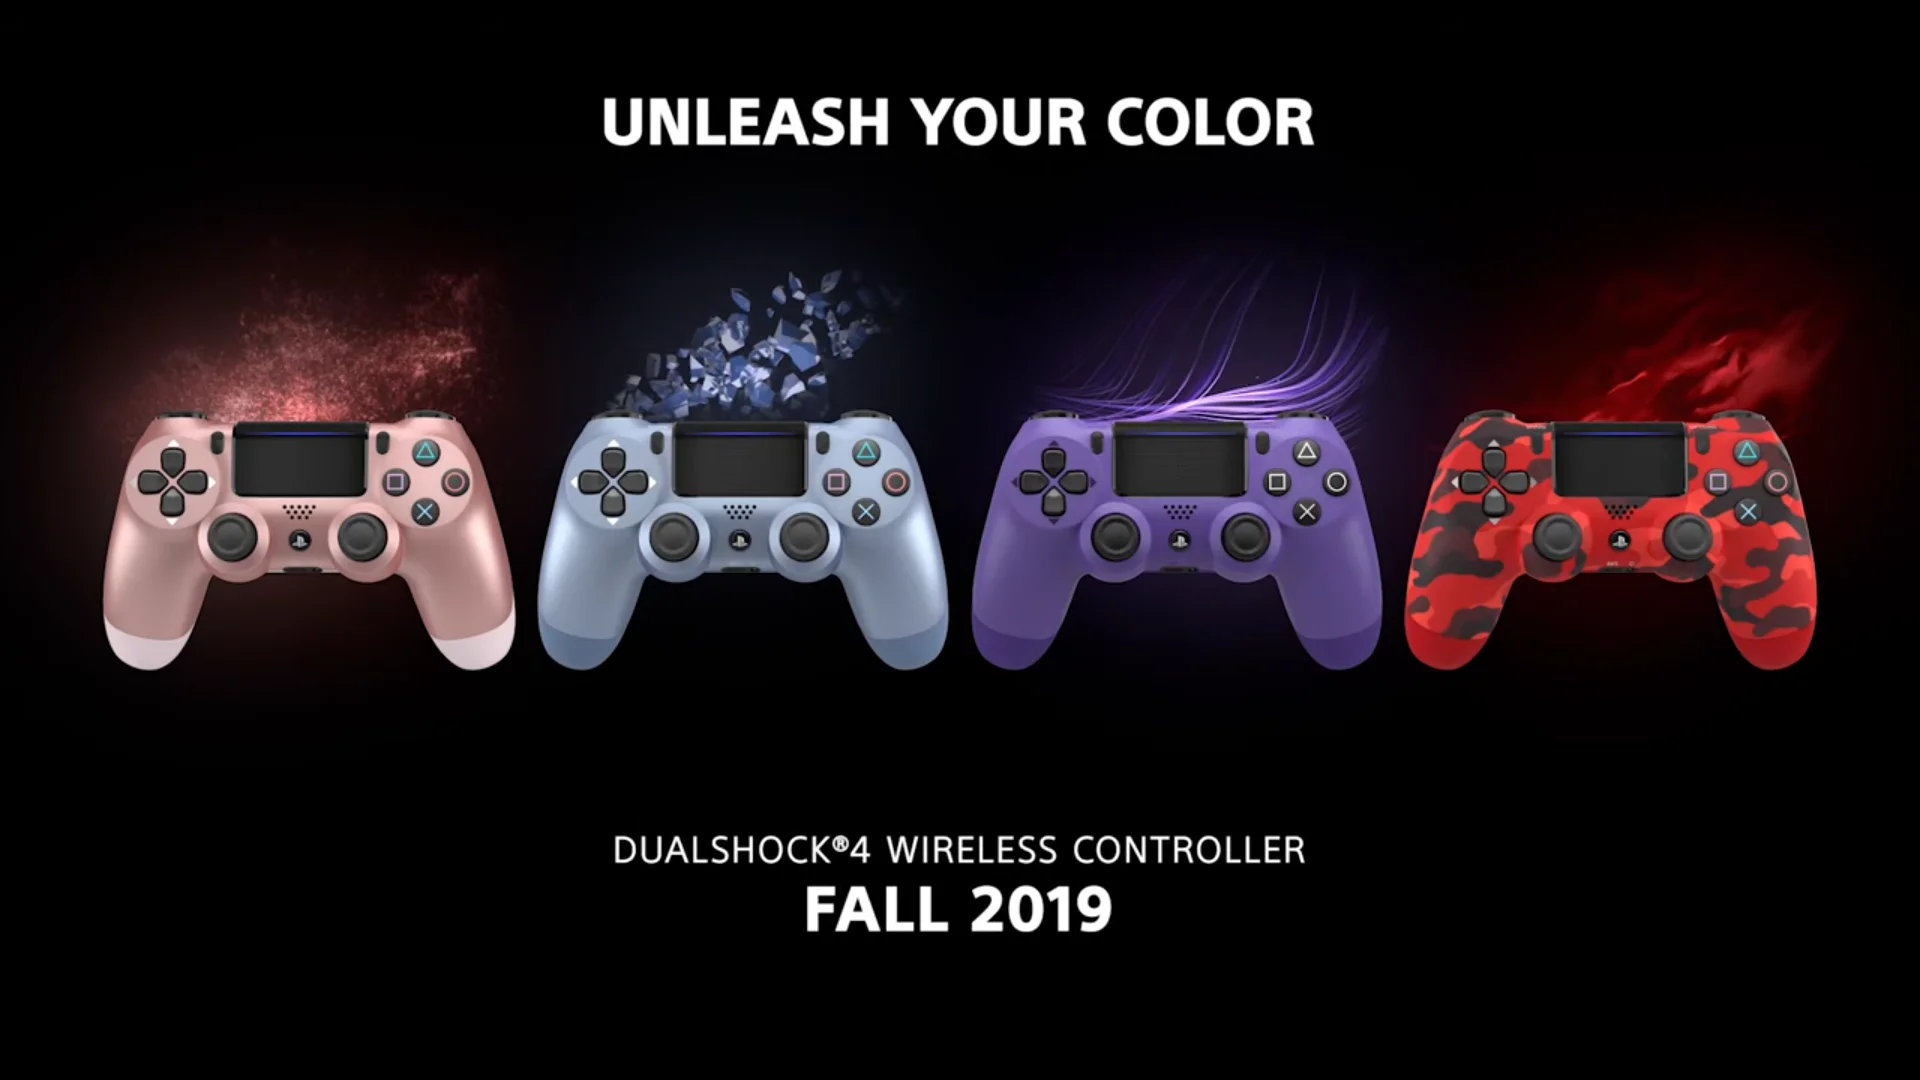 4 New DualShock 4 controllers announced! Releasing in September